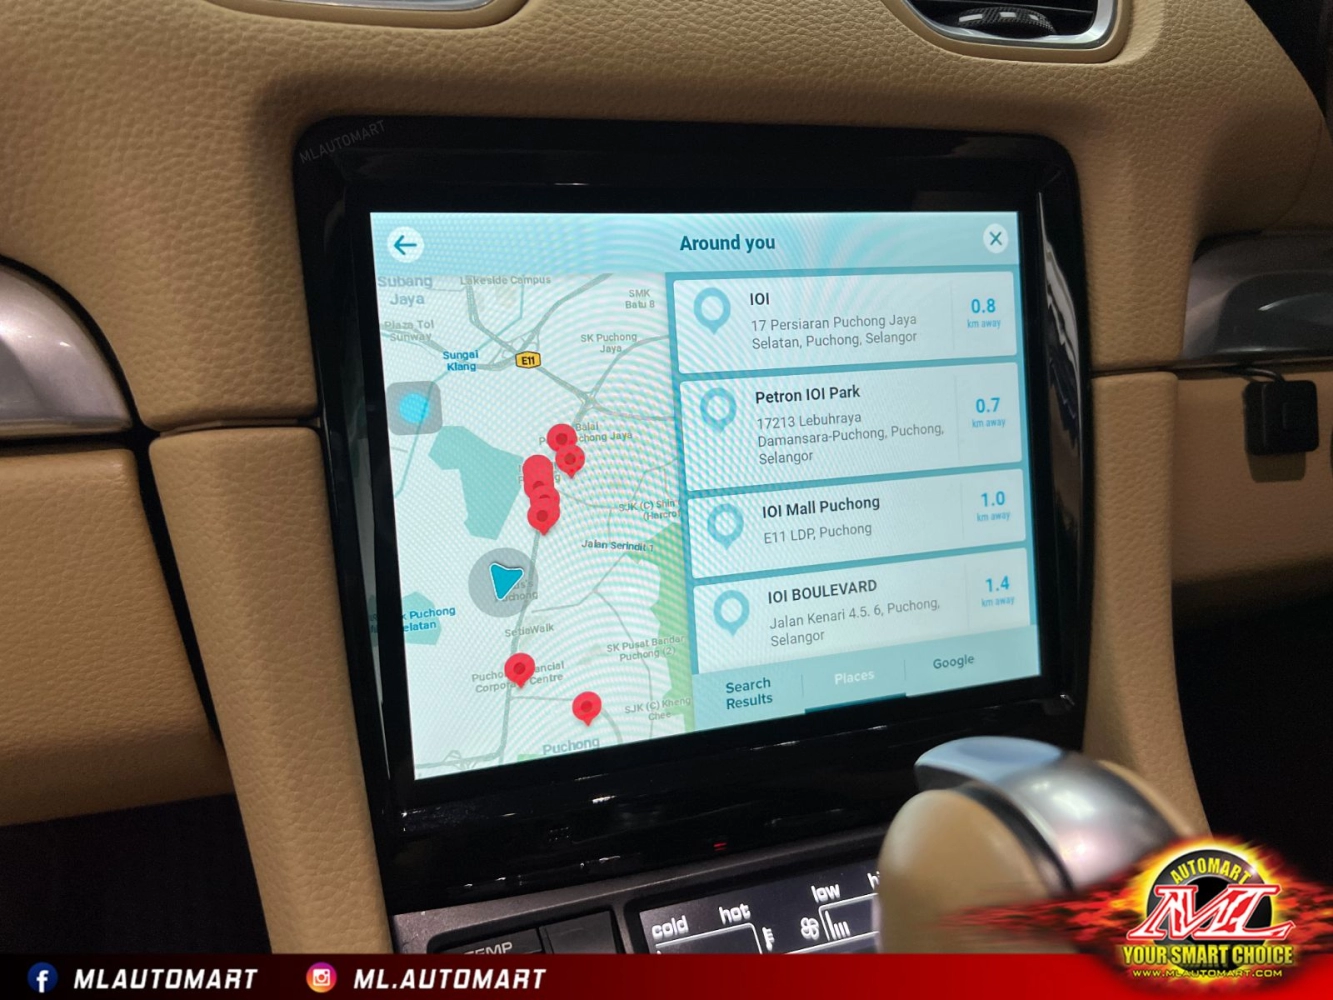 Porsche Cayman 718 Android Monitor